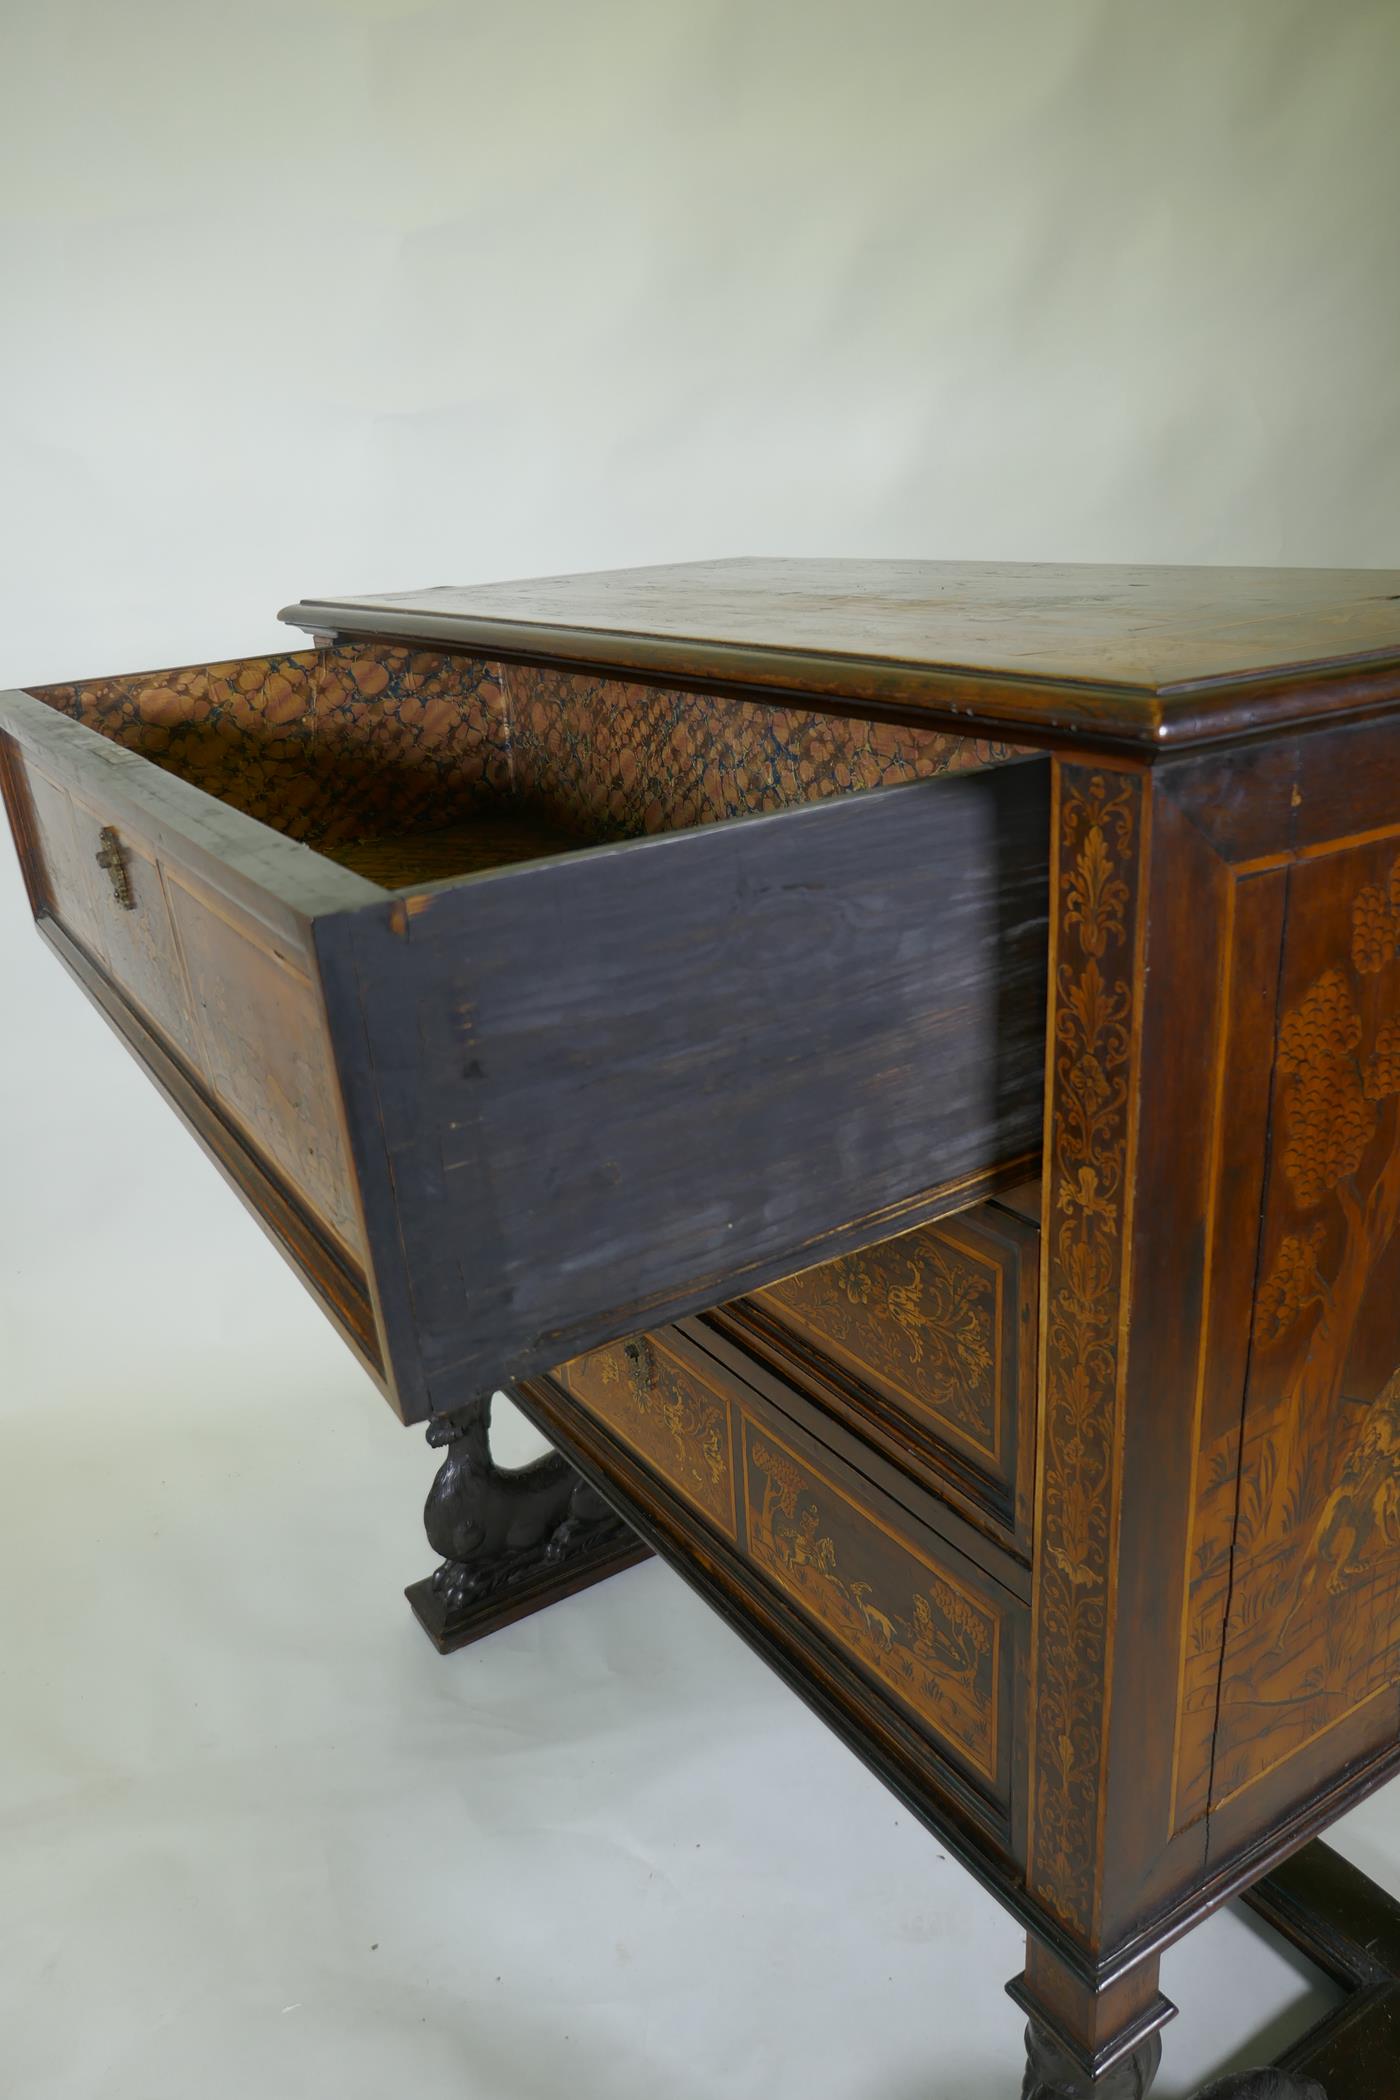 C18th/C19th Italian/Swiss marquetry inlaid walnut chest of three drawers, inlaid with hunting - Image 10 of 10